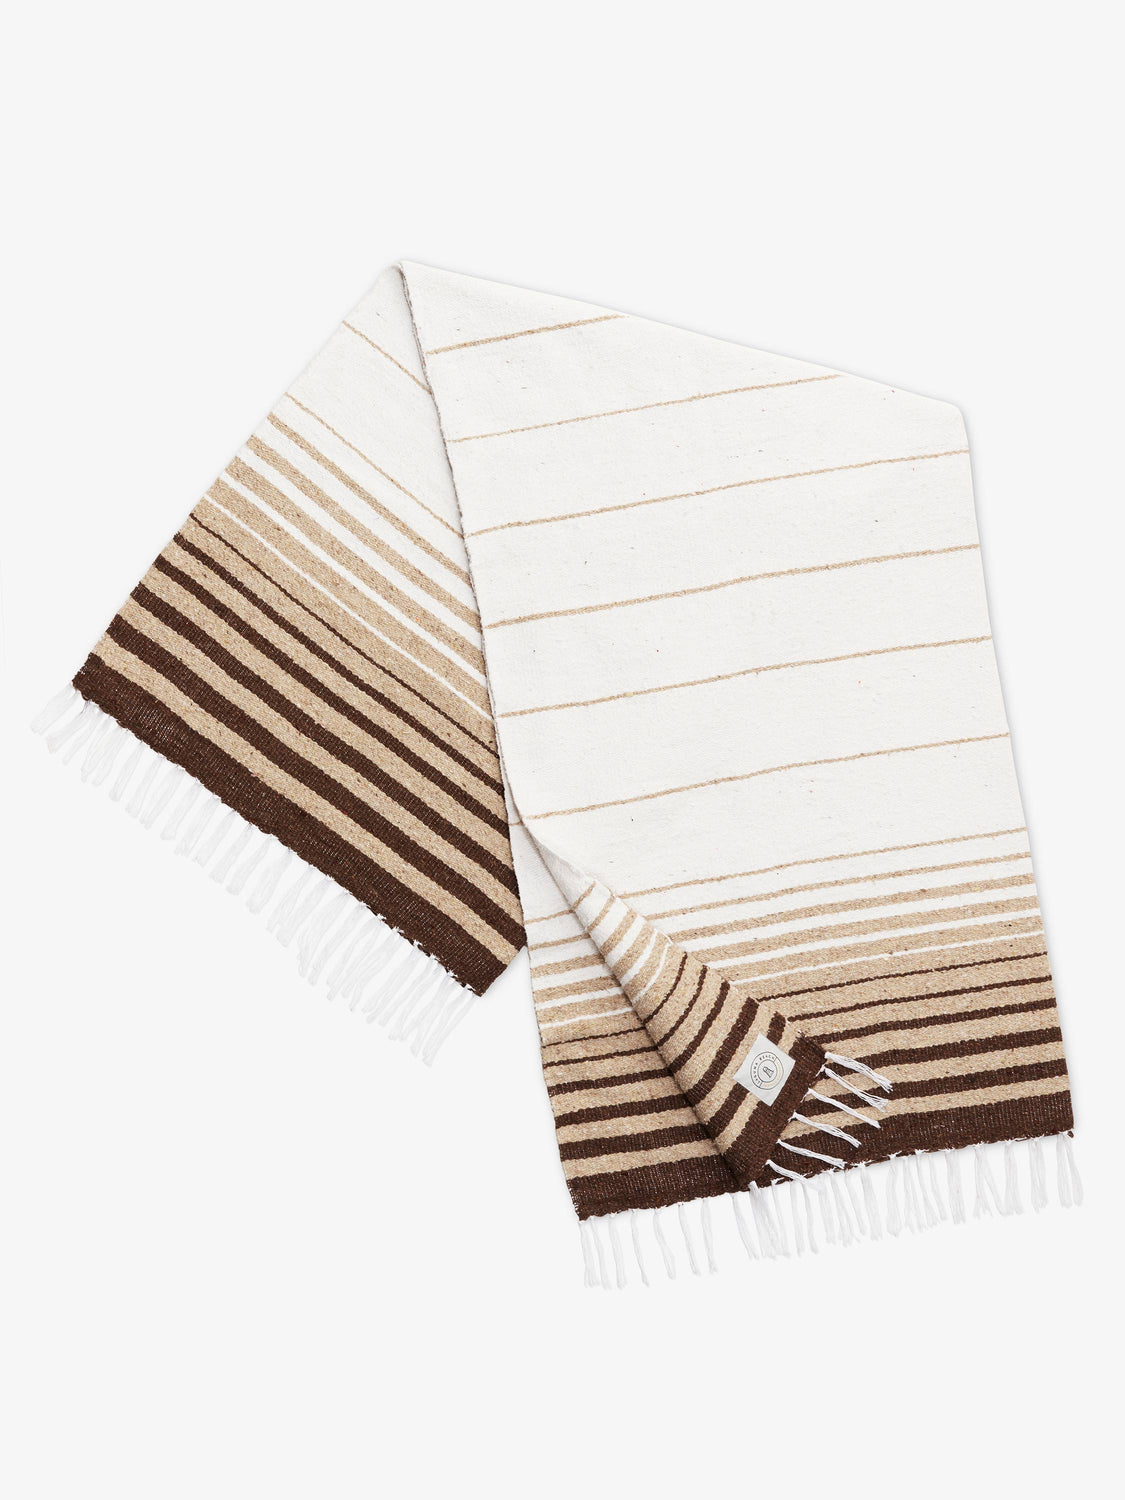 A folded traditional, hand-woven Mexican blanket in brown, tan, and white stripe pattern with fringe.